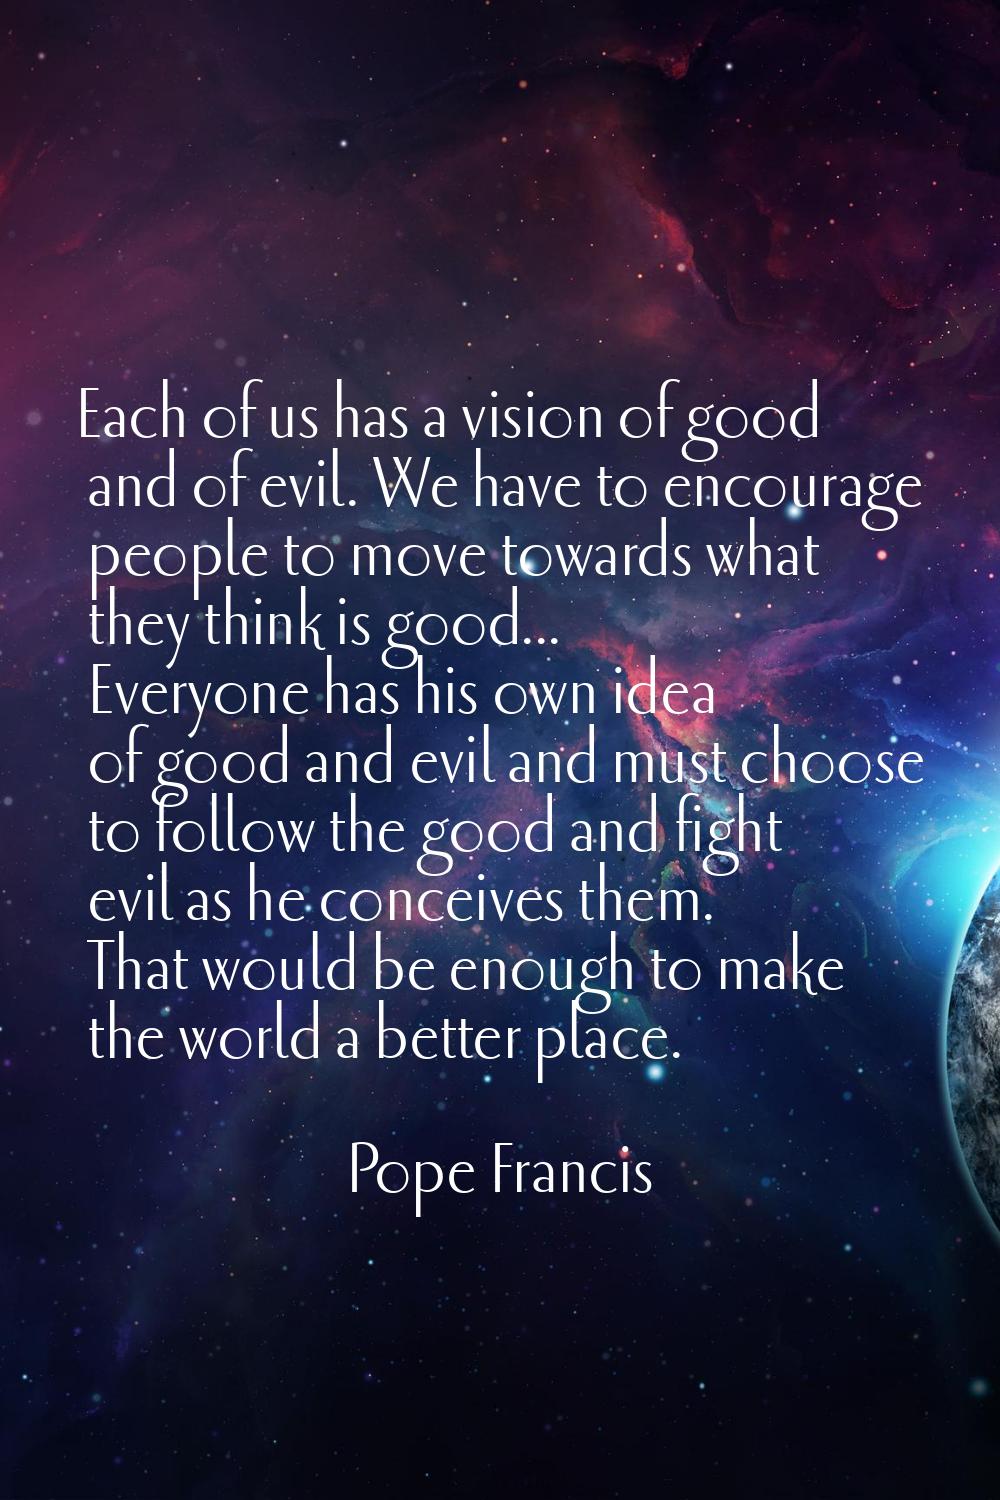 Each of us has a vision of good and of evil. We have to encourage people to move towards what they 